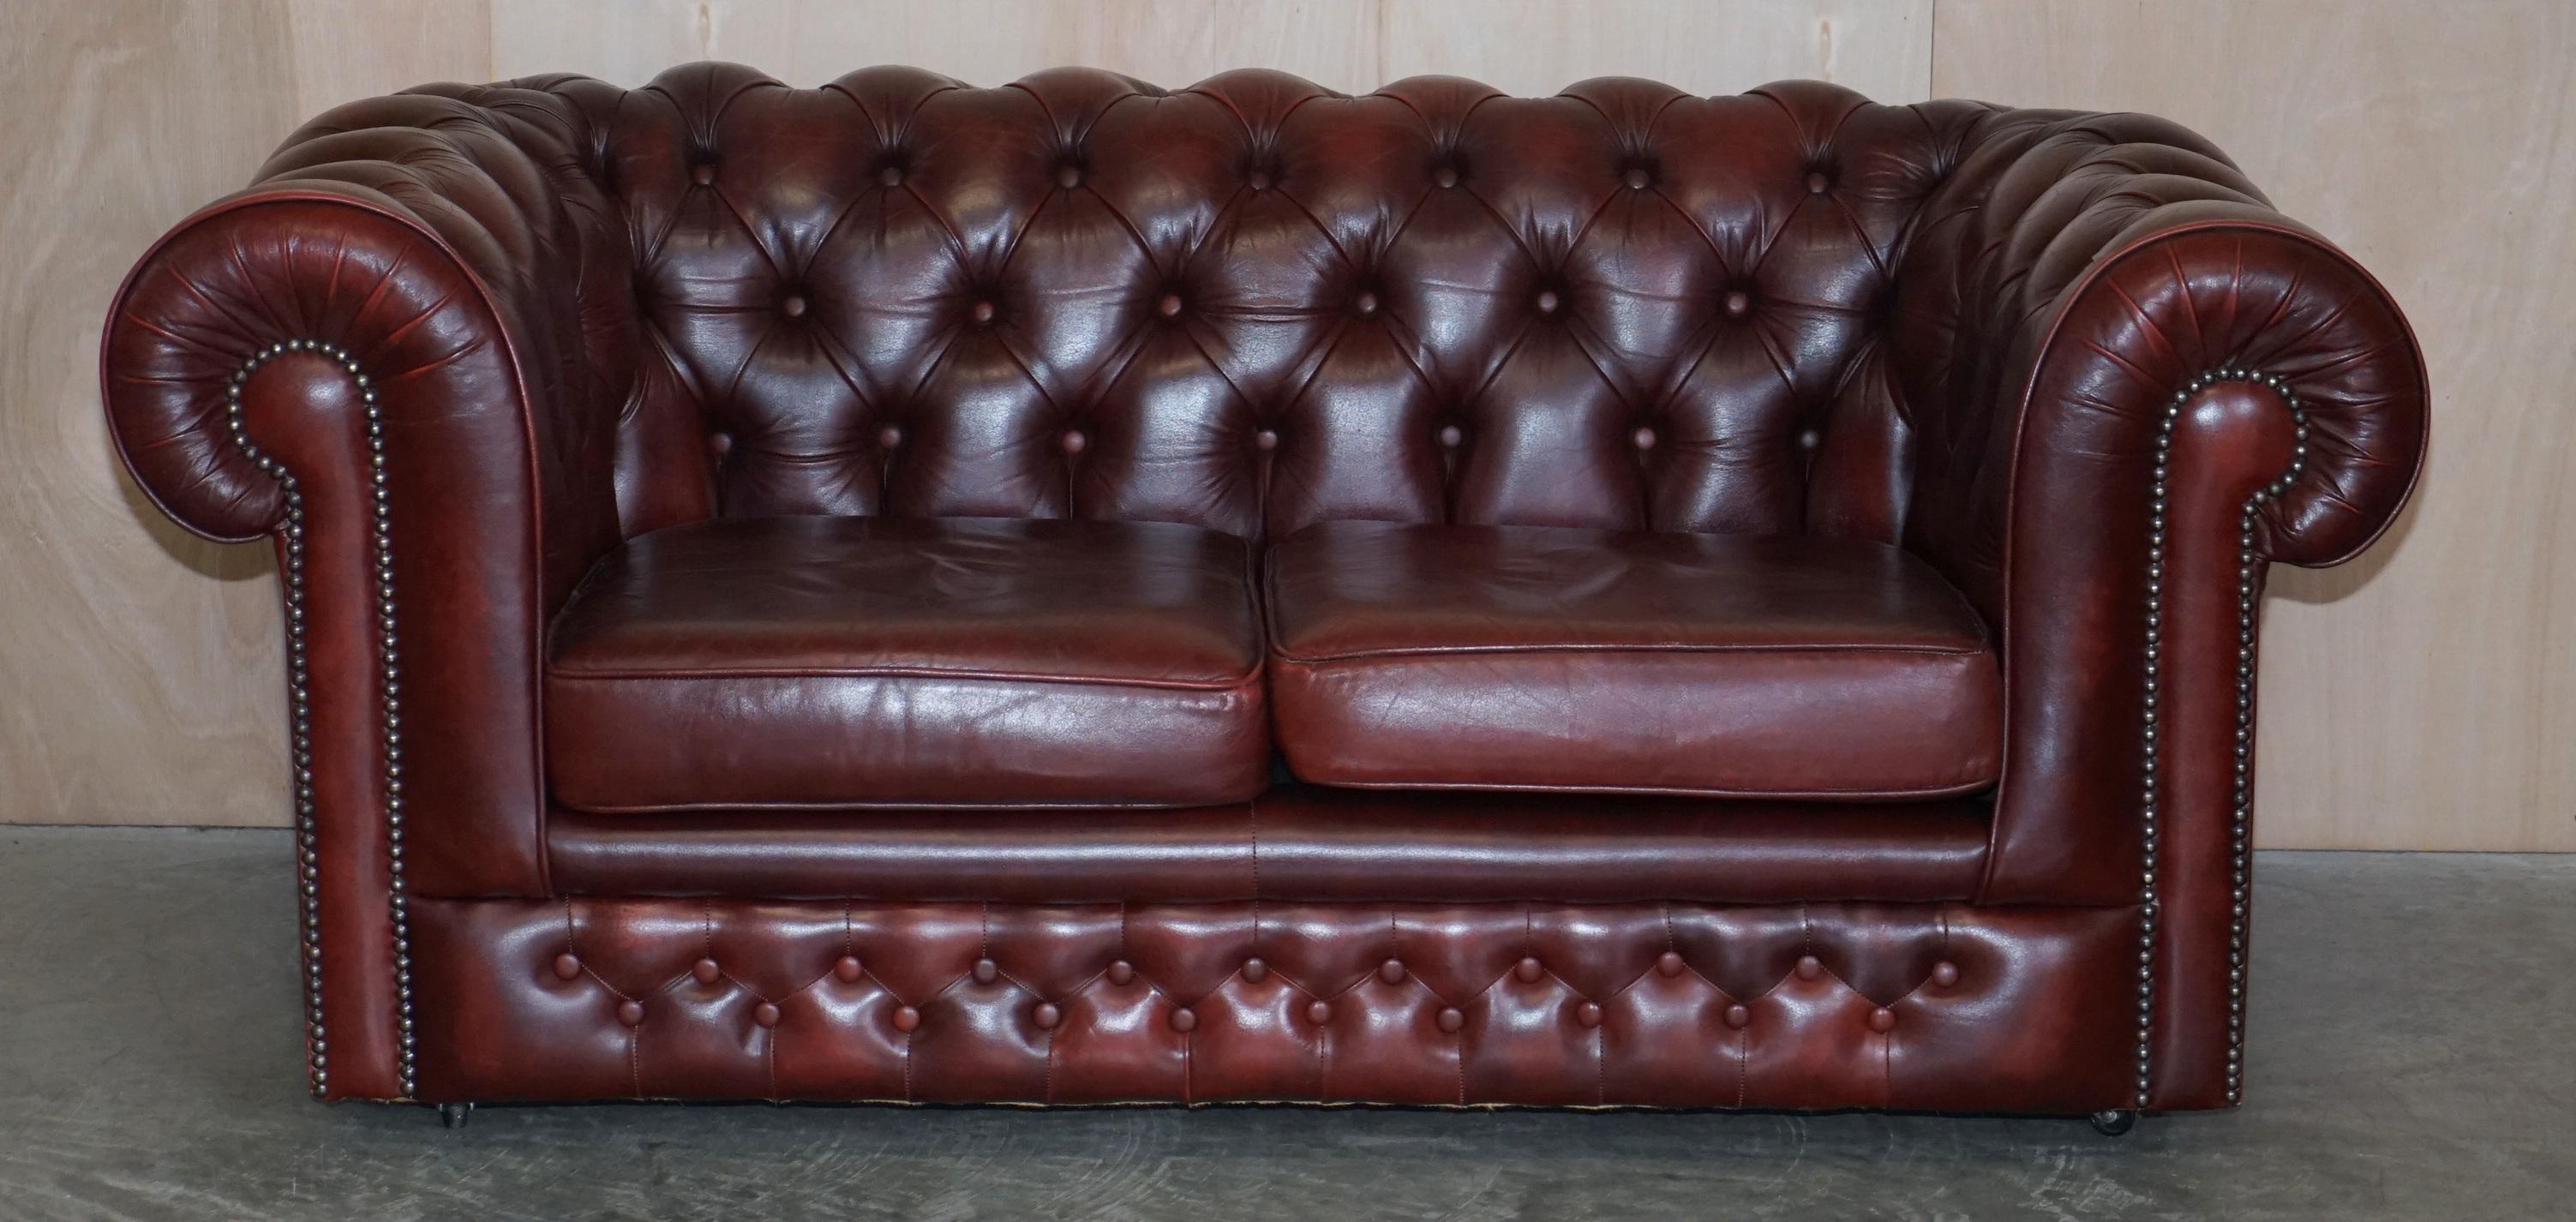 We are delighted to offer this stunning vintage Oxblood leather Chesterfield Club Sofa which is part of a suite

This sofa is part of a suite as mentioned, I have the matching pair if armchairs listed under my other items

A very good looking